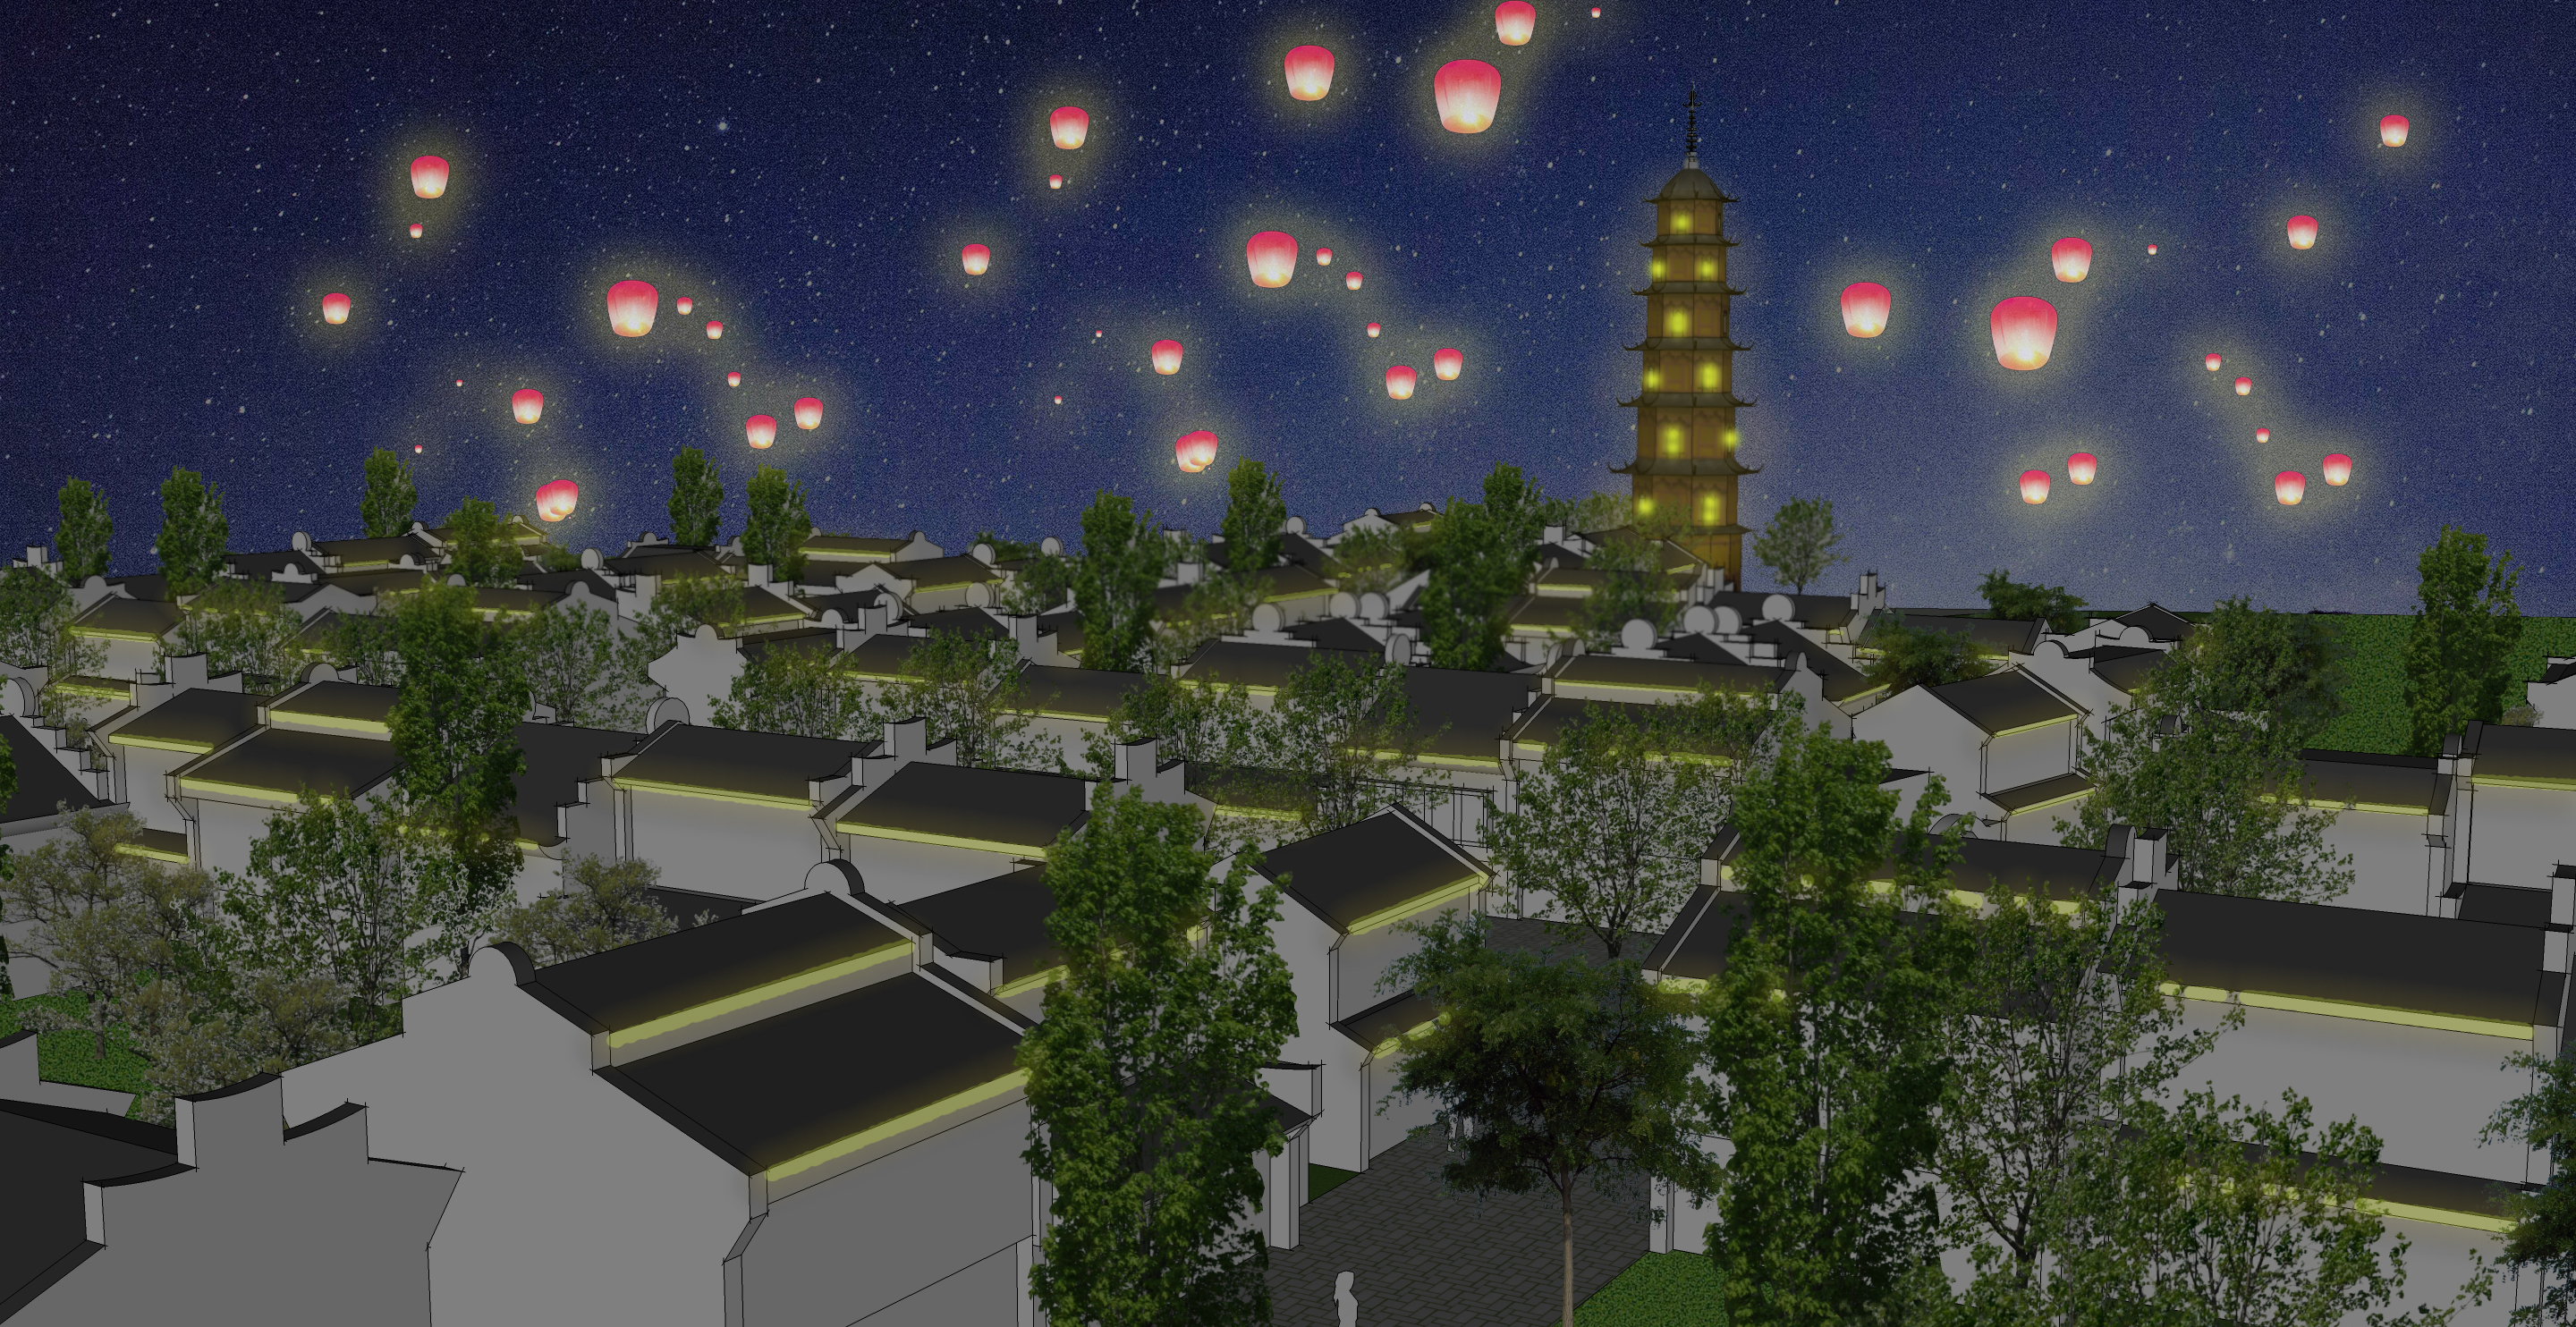 Lanterns floating in the sky above a suburban neighborhood.